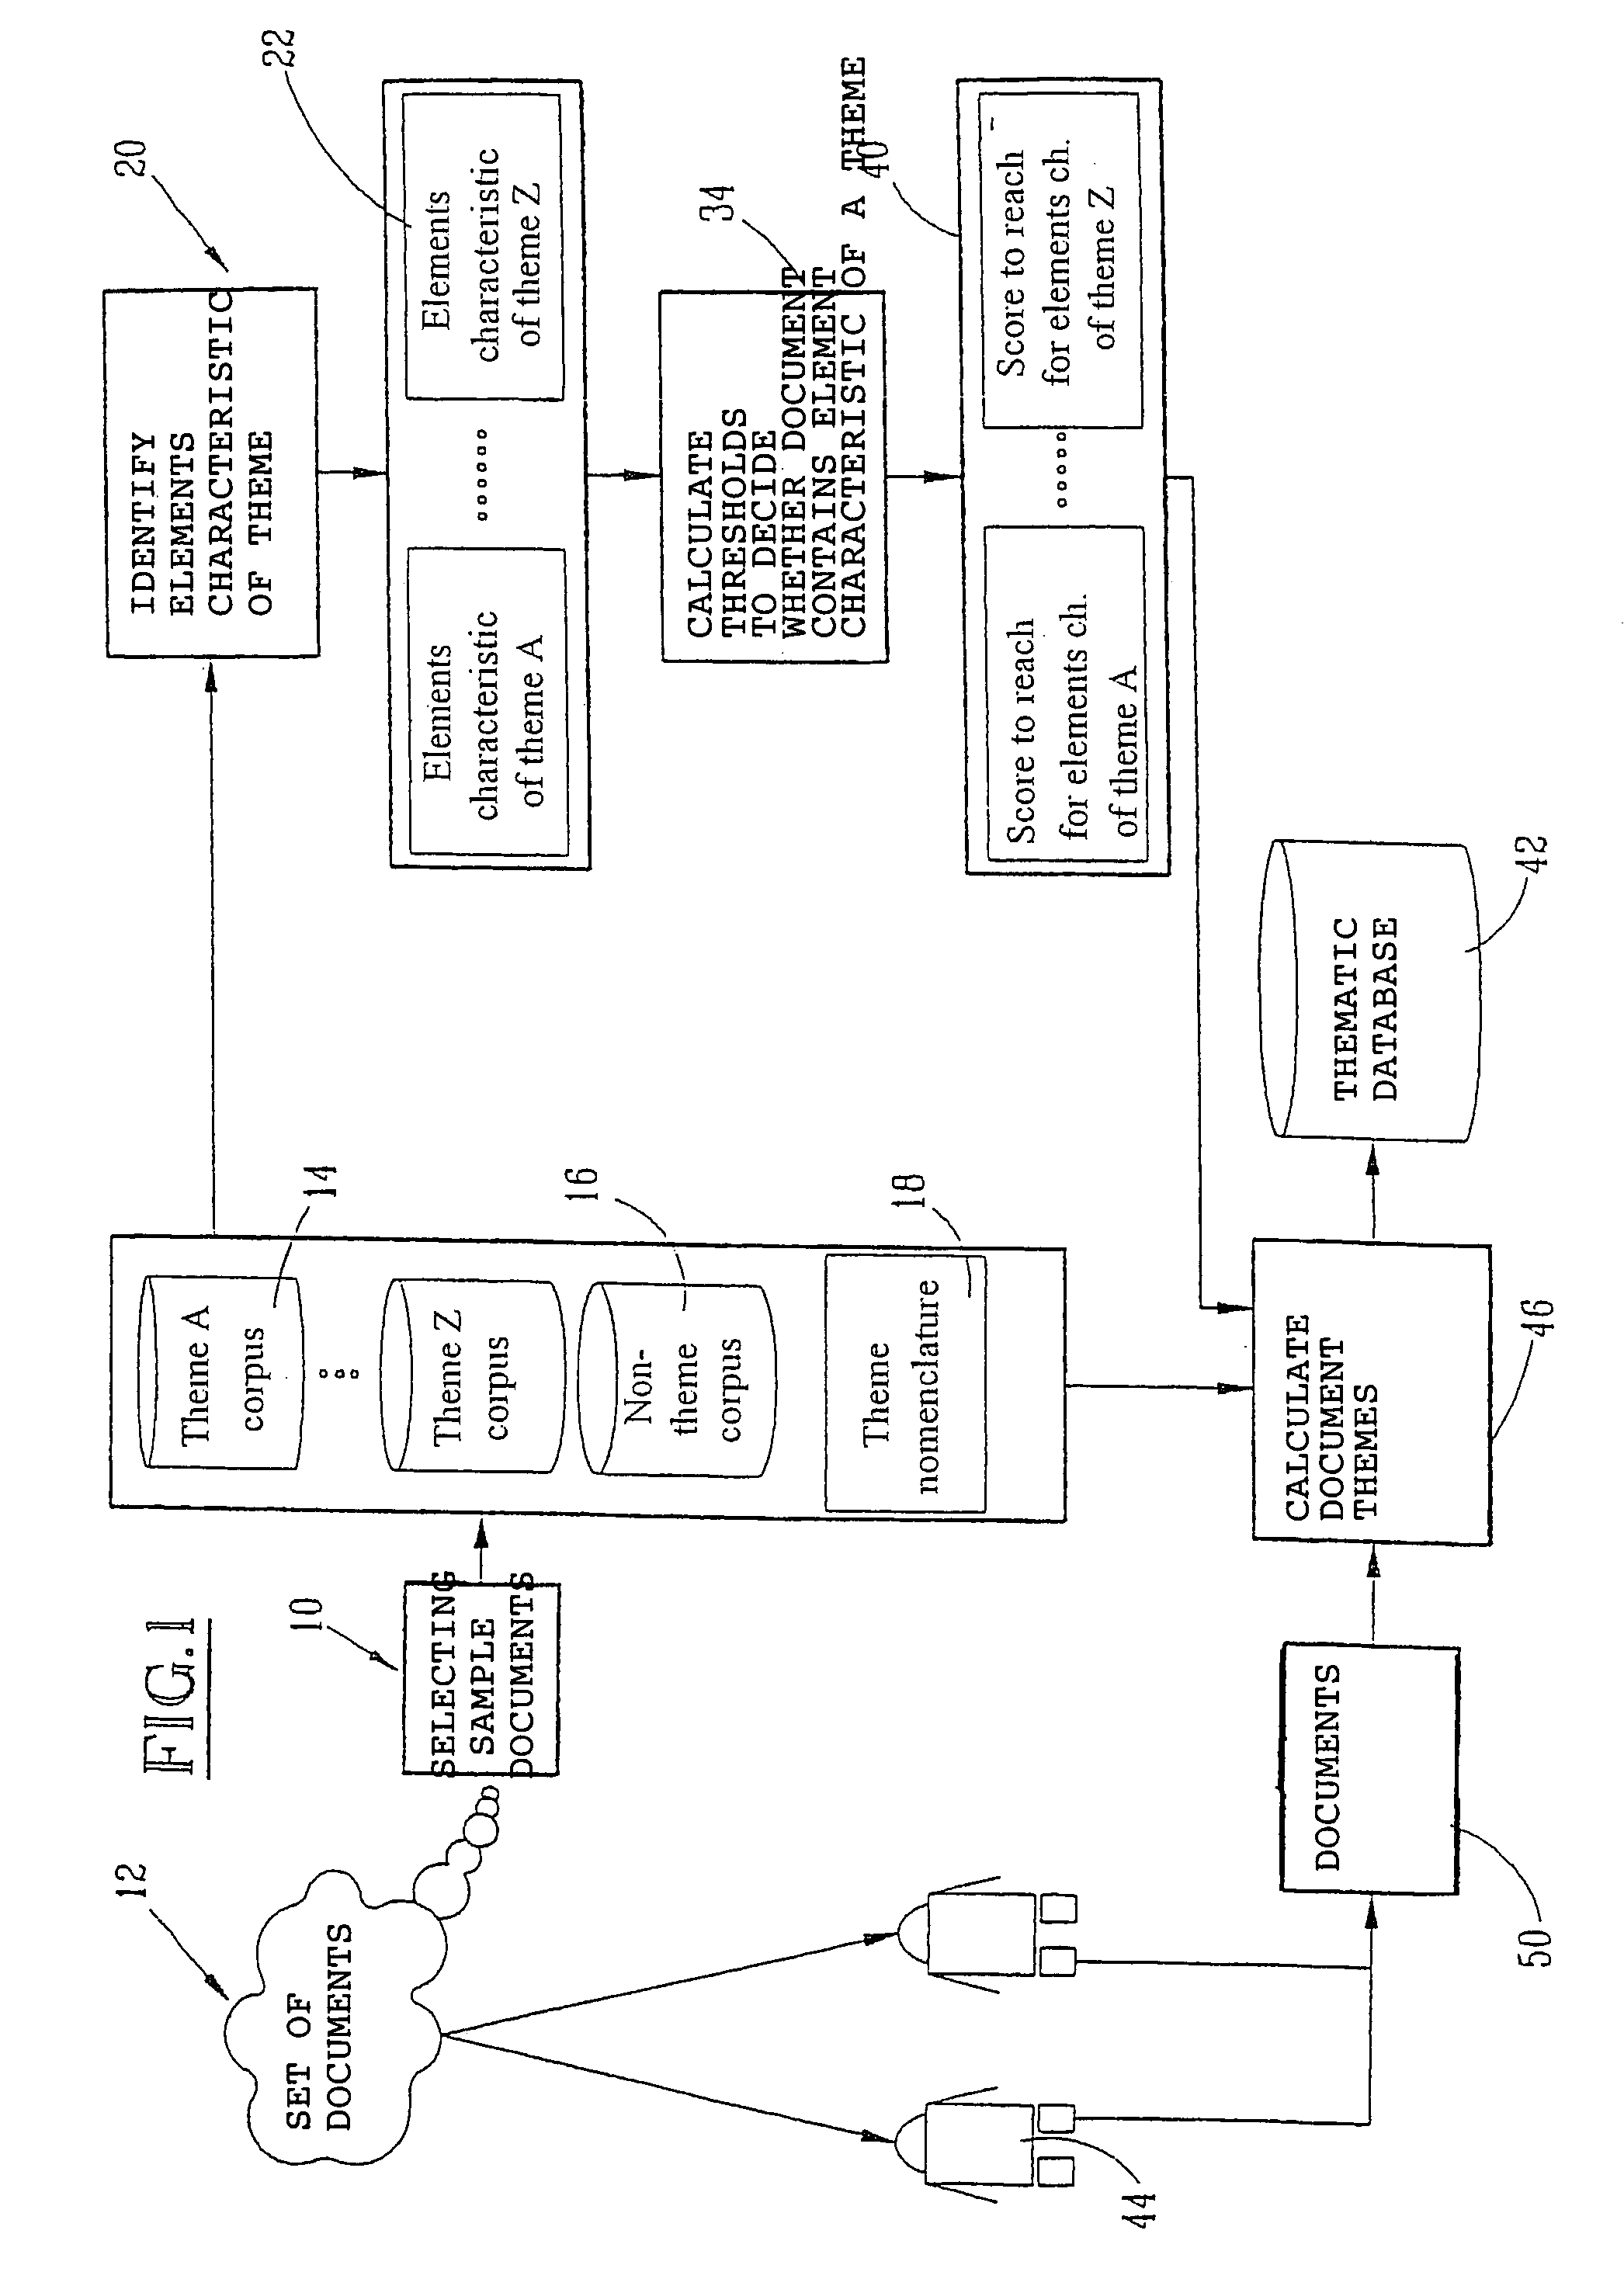 Method of thematic classification of documents, themetic classification module, and search engine incorporating such a module